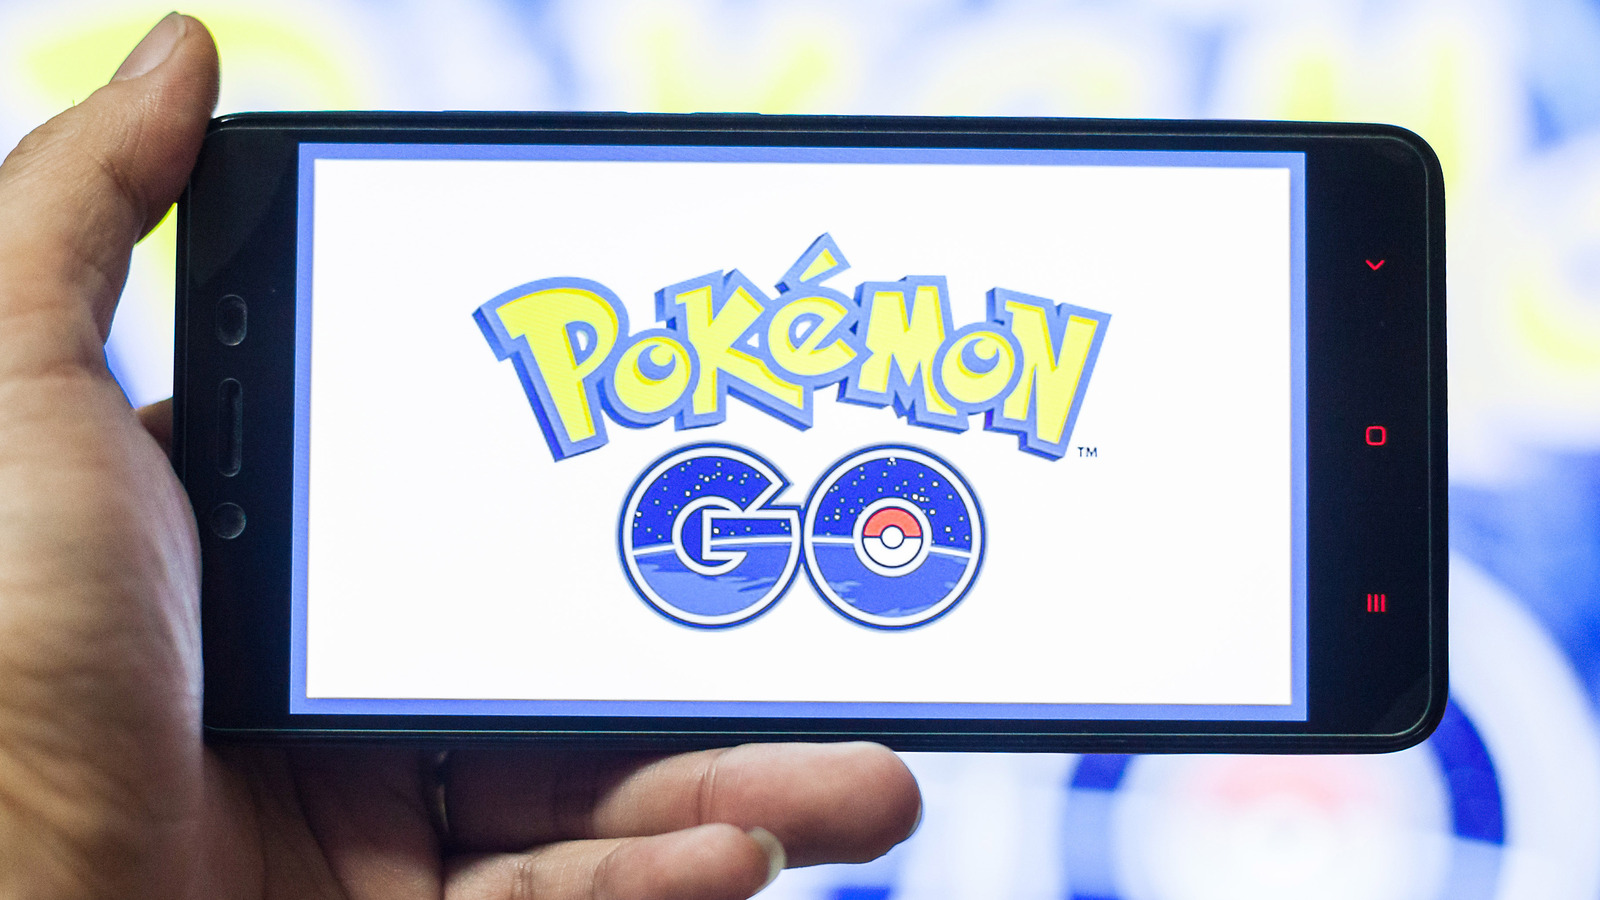 Pokemon GO Creator's Next AR Game Is All About Virtual Pets